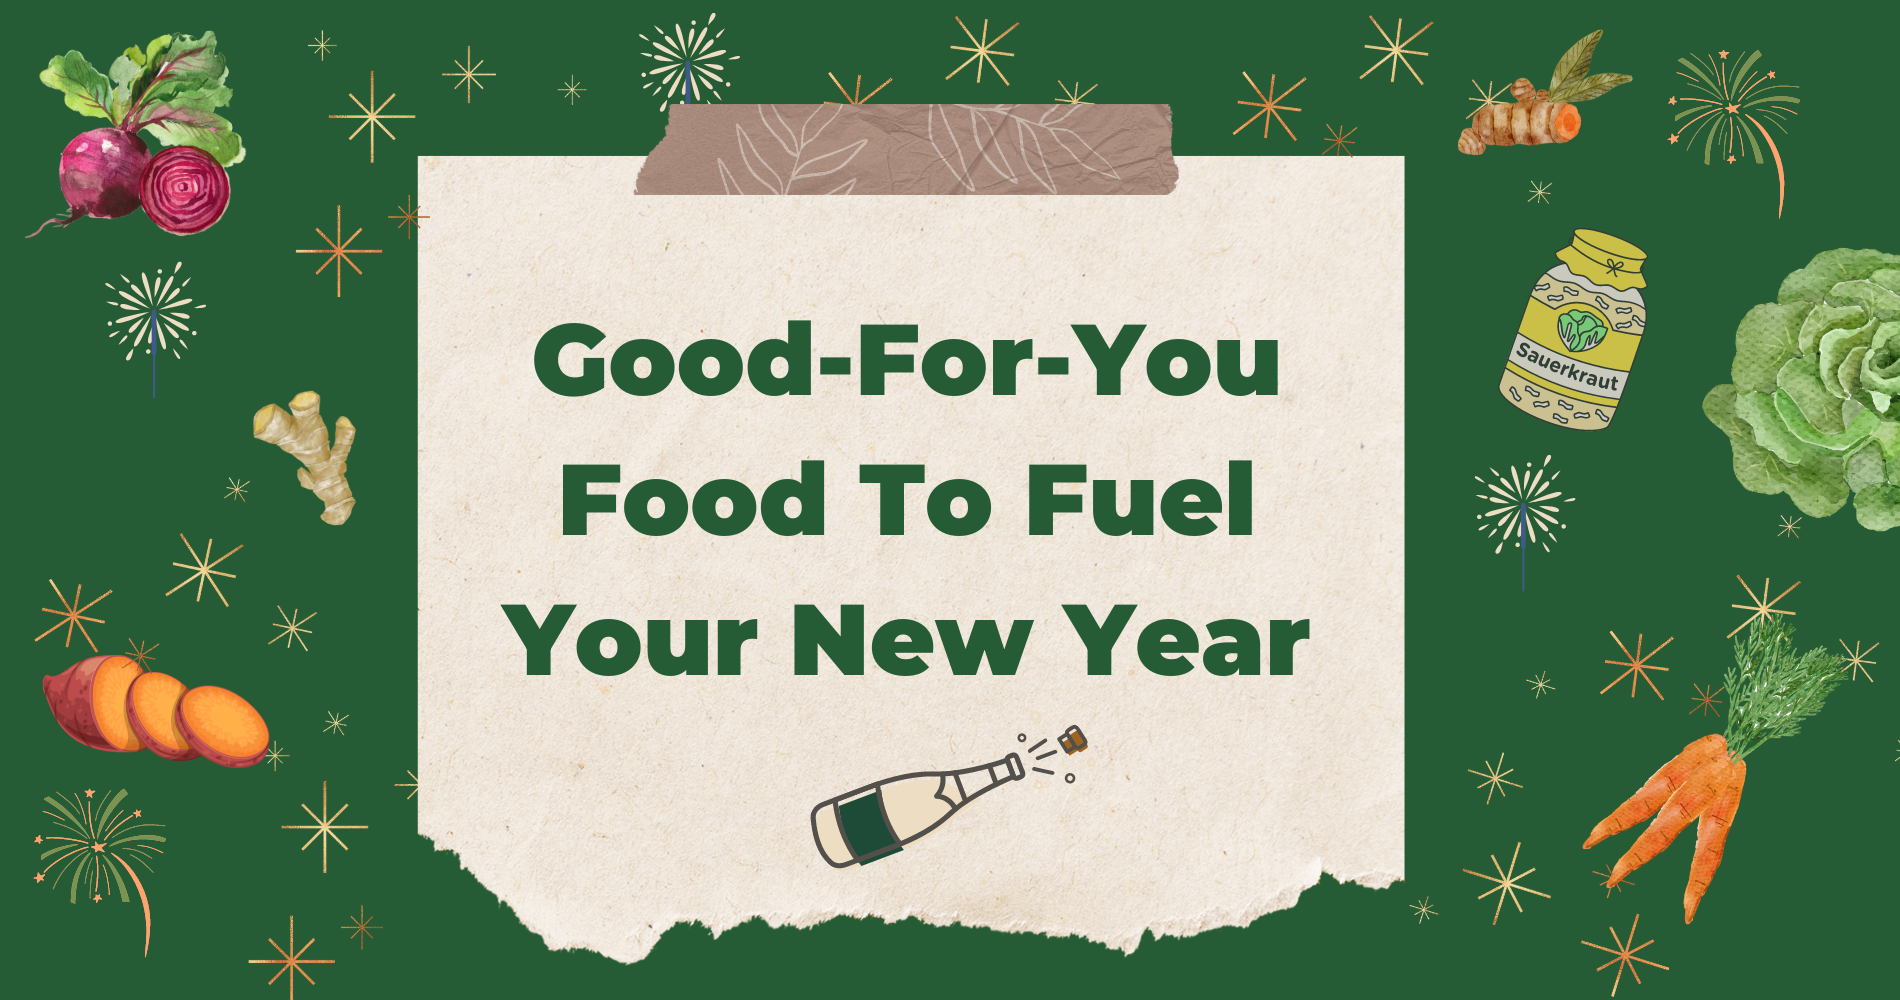 Good-For-You Food To Fuel Your New Year image